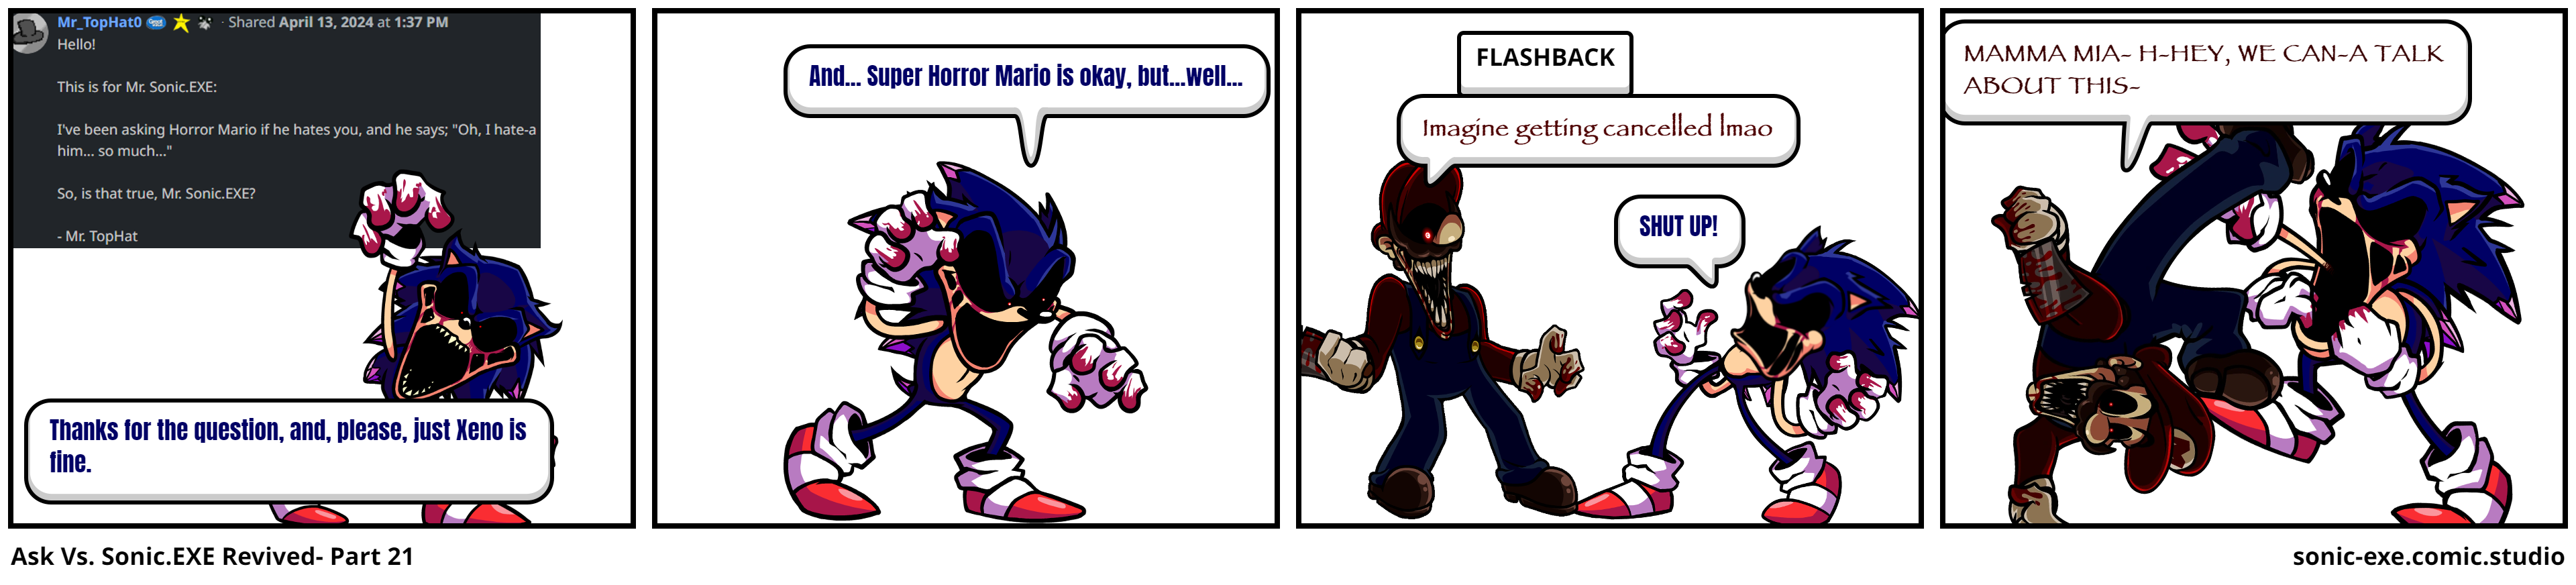 Ask Vs. Sonic.EXE Revived- Part 21